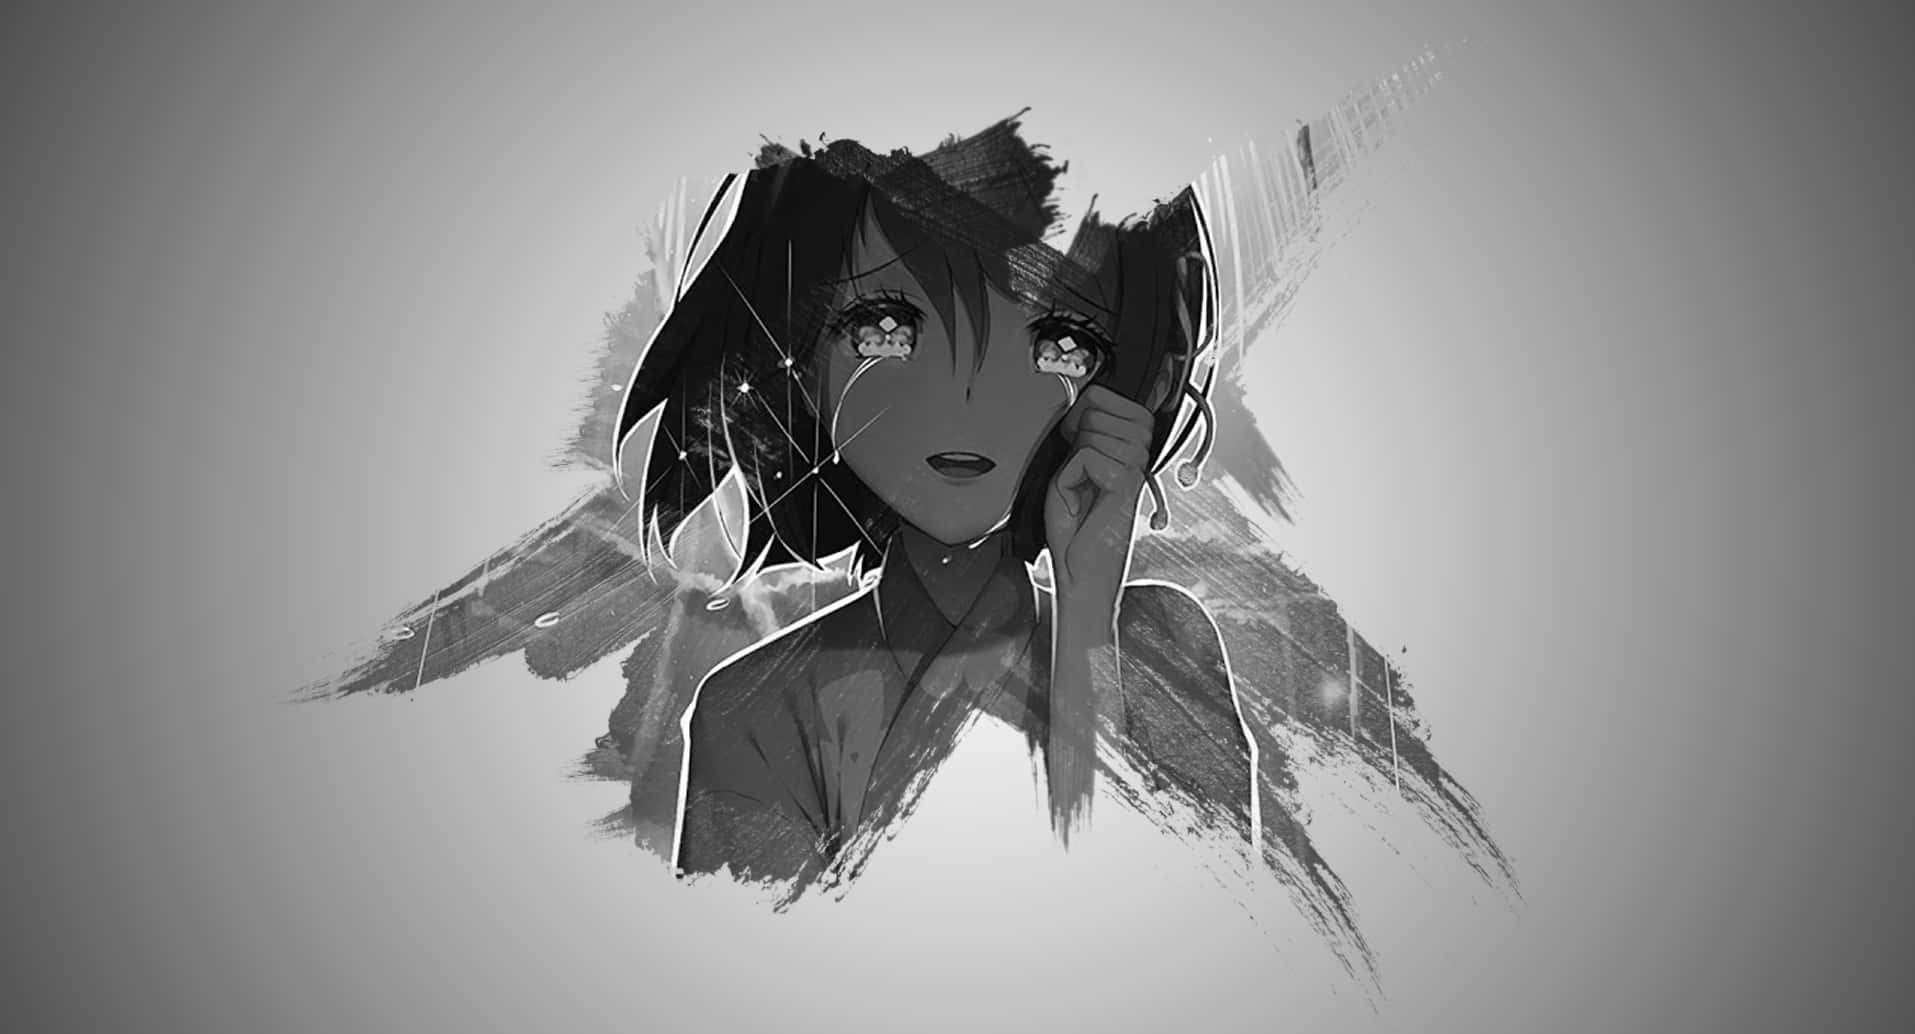 Black And White Anime Girl Crying Landscape Minimalist Wallpaper